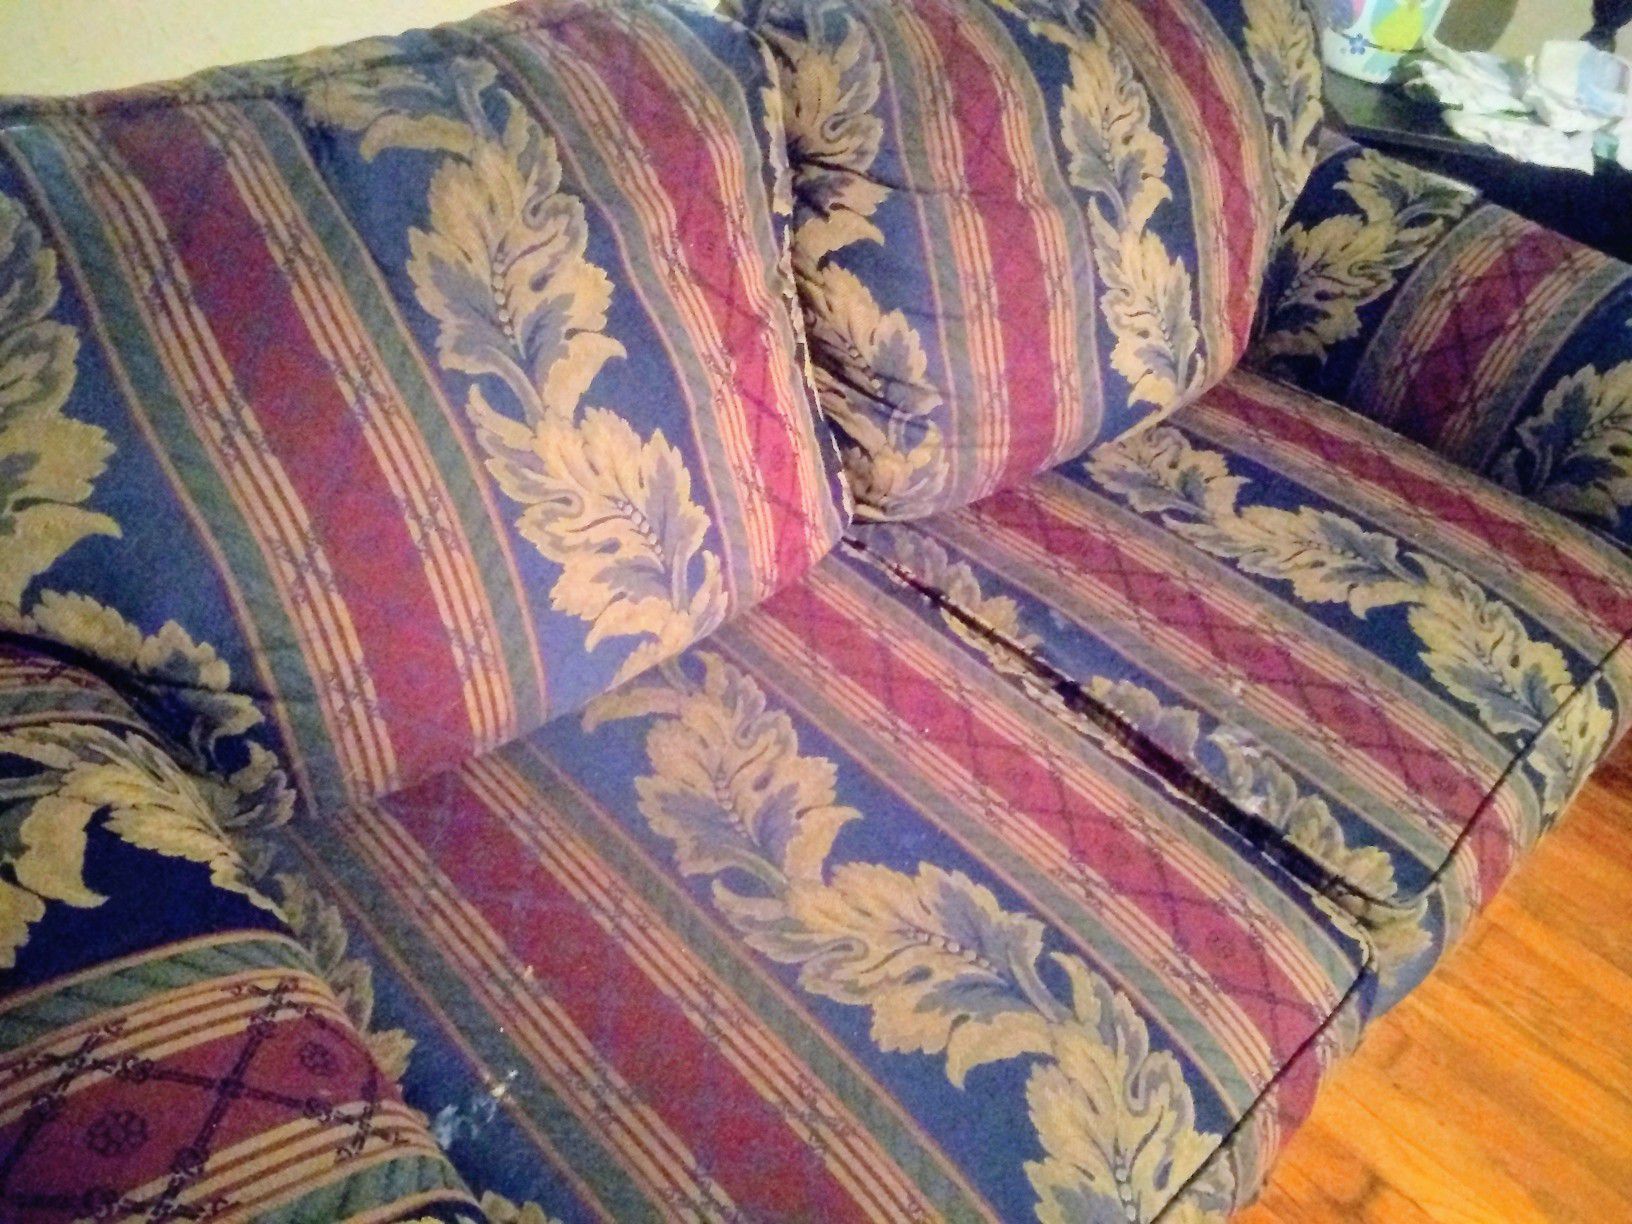 Kroehler brand matching love seat and couch